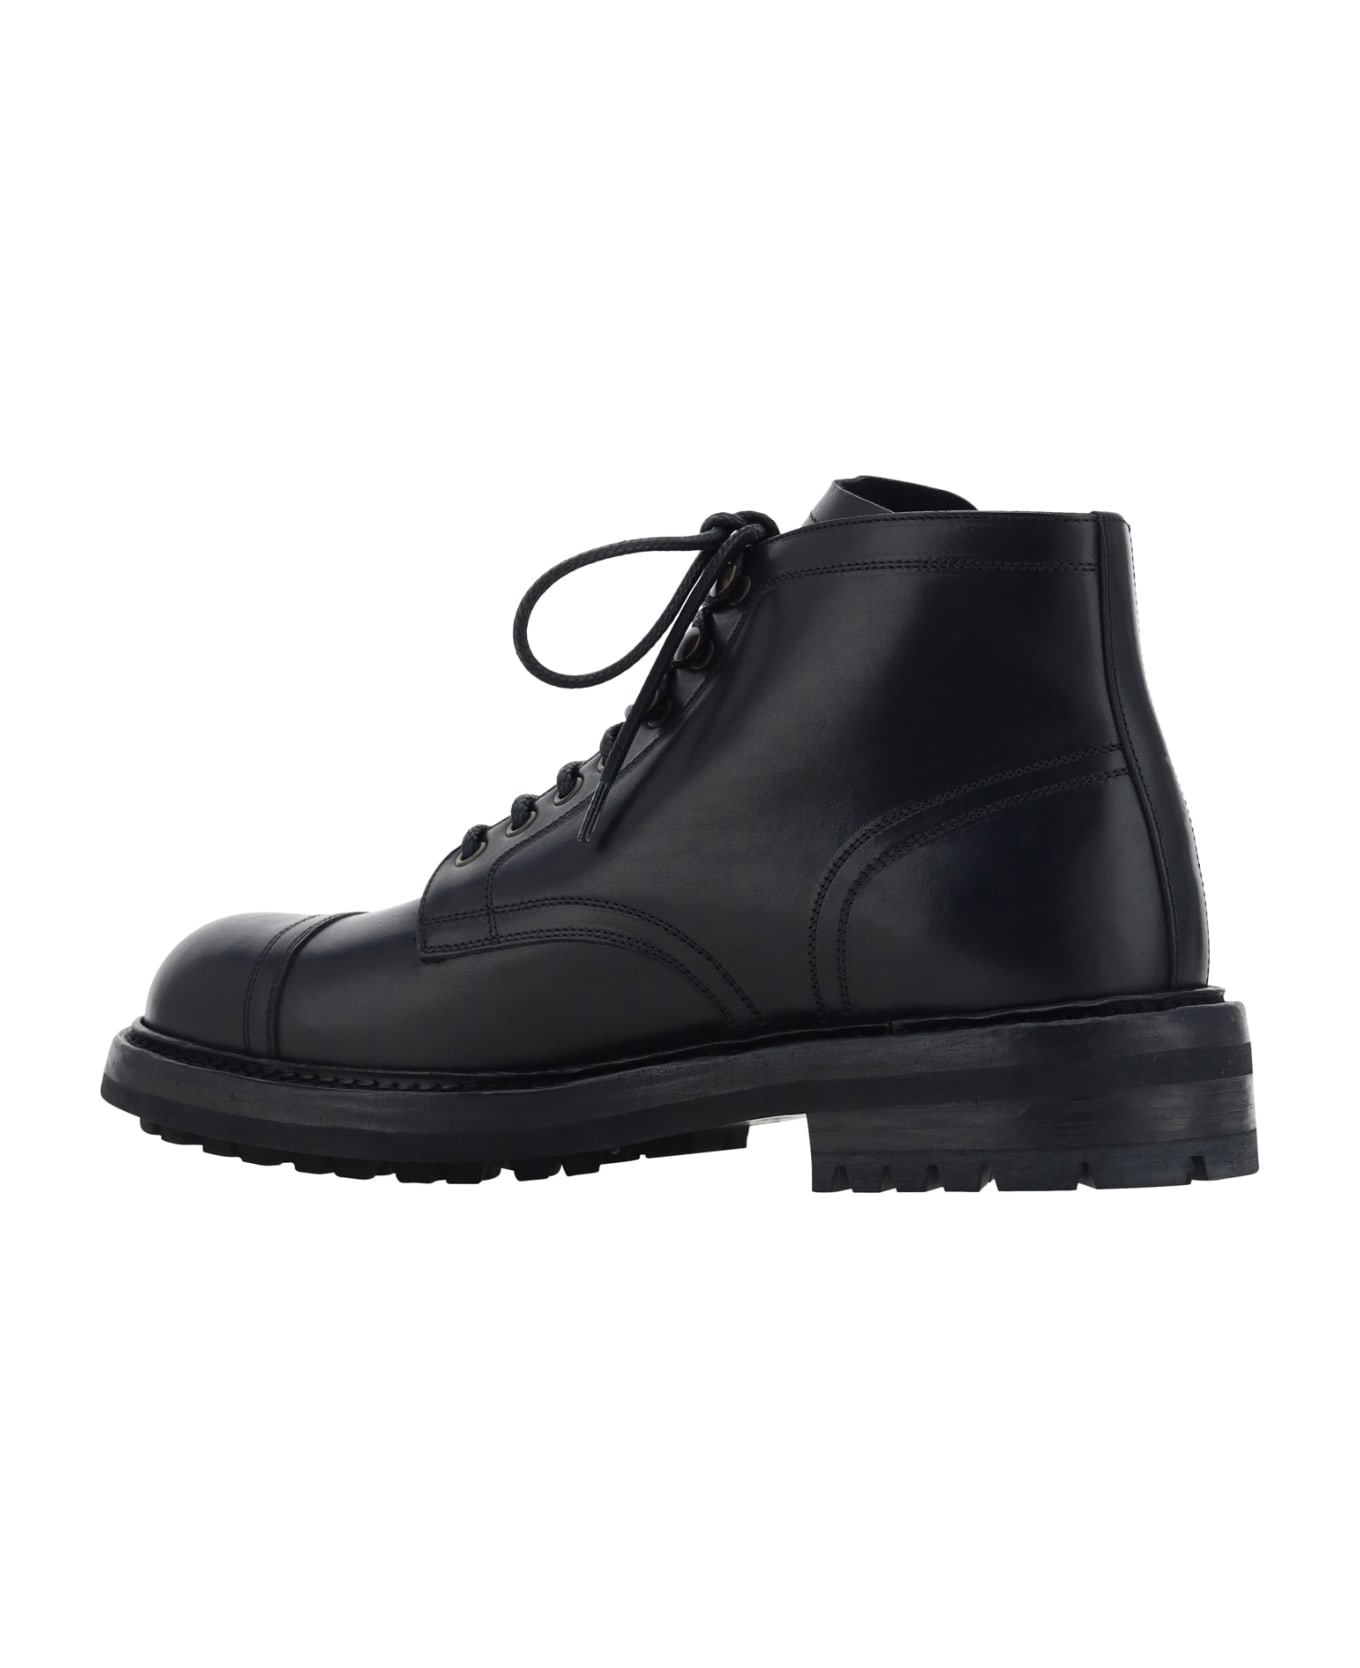 Dolce & Gabbana Lace-up Ankle Boots - Black